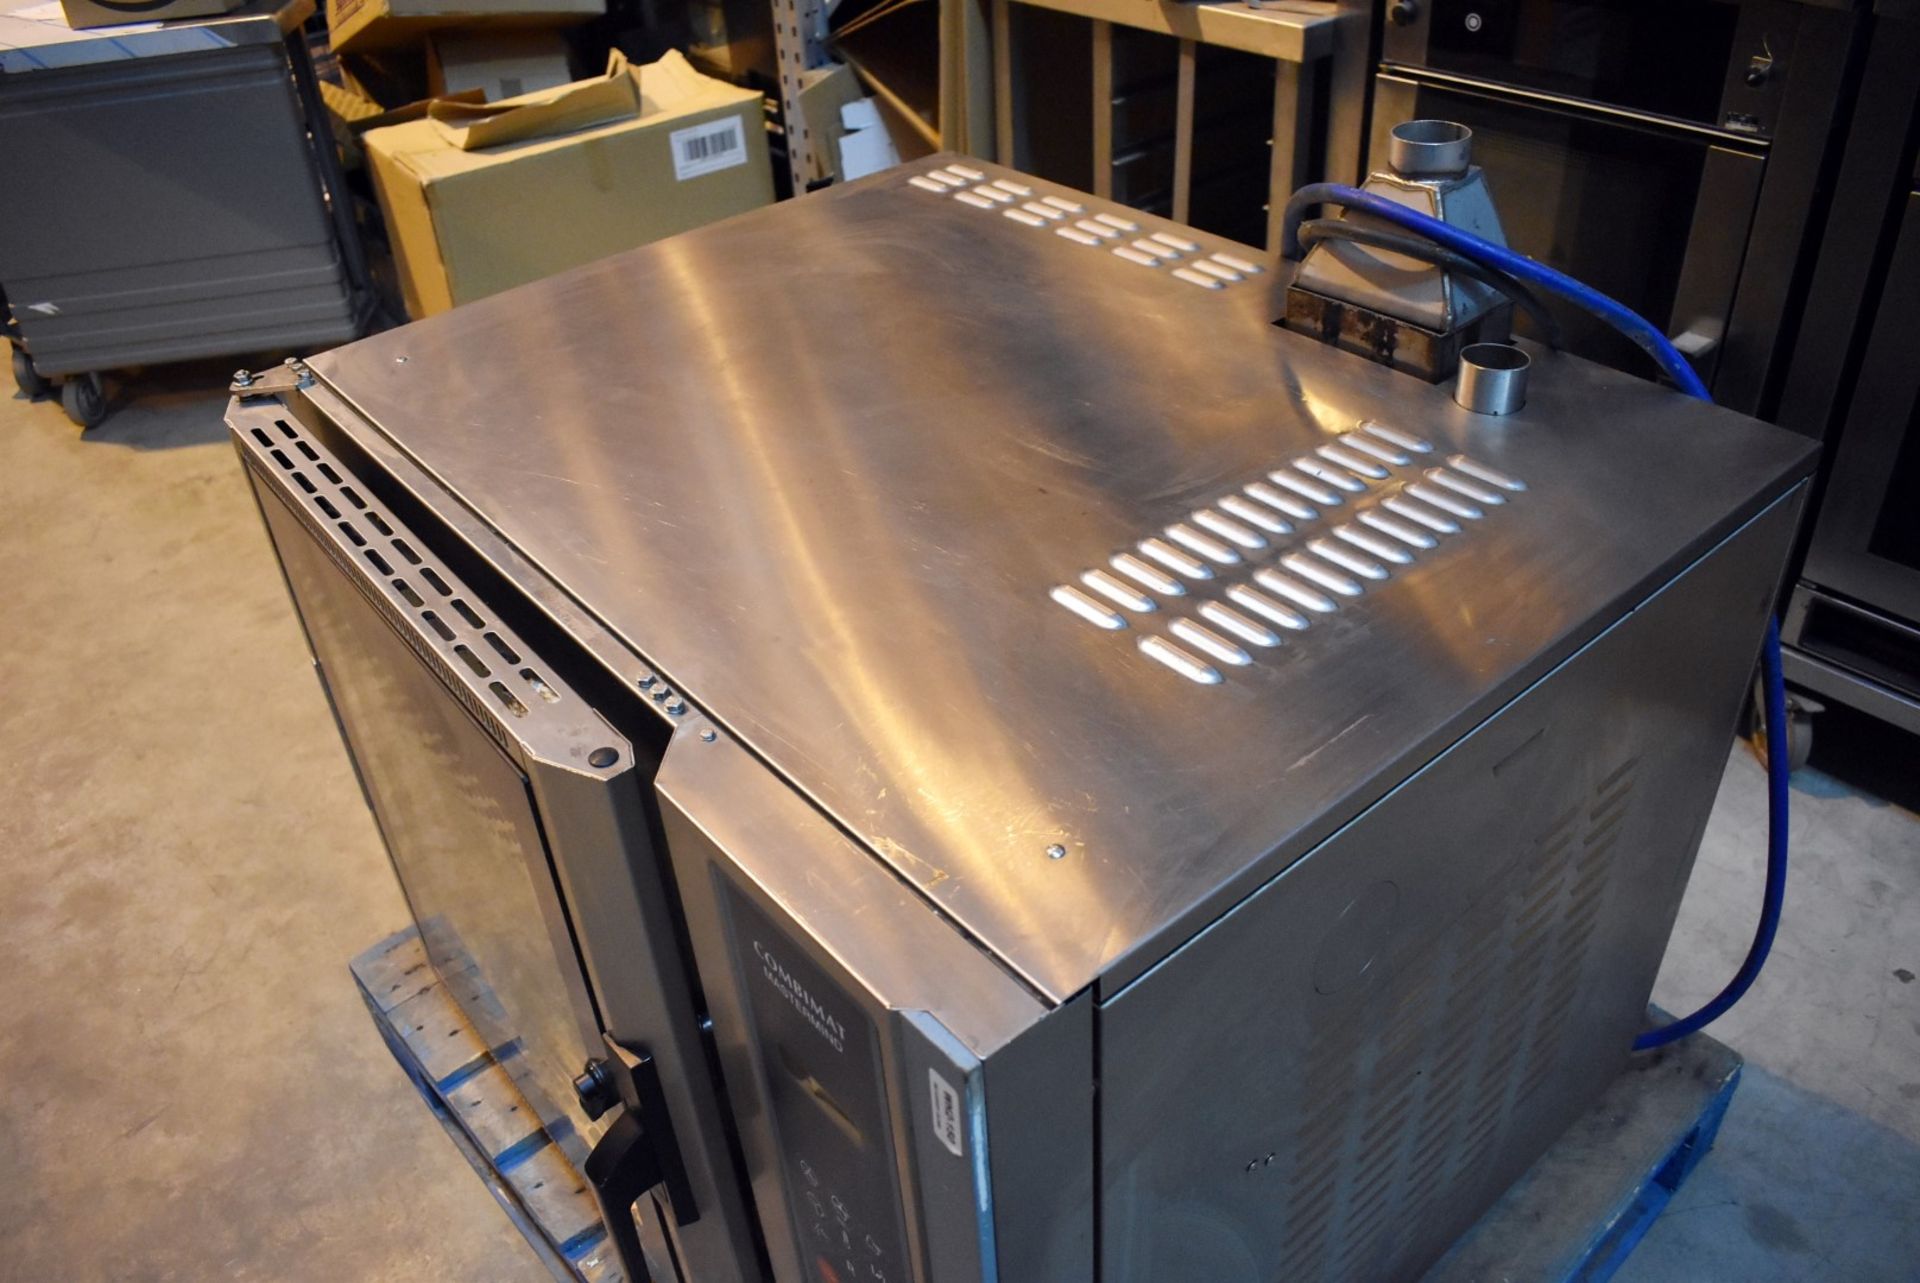 1 x Leventi Combimat mk3.1 Mastermind 6 Grid Combi Steam Oven - 3 Phase - Recently Removed From a - Image 4 of 11